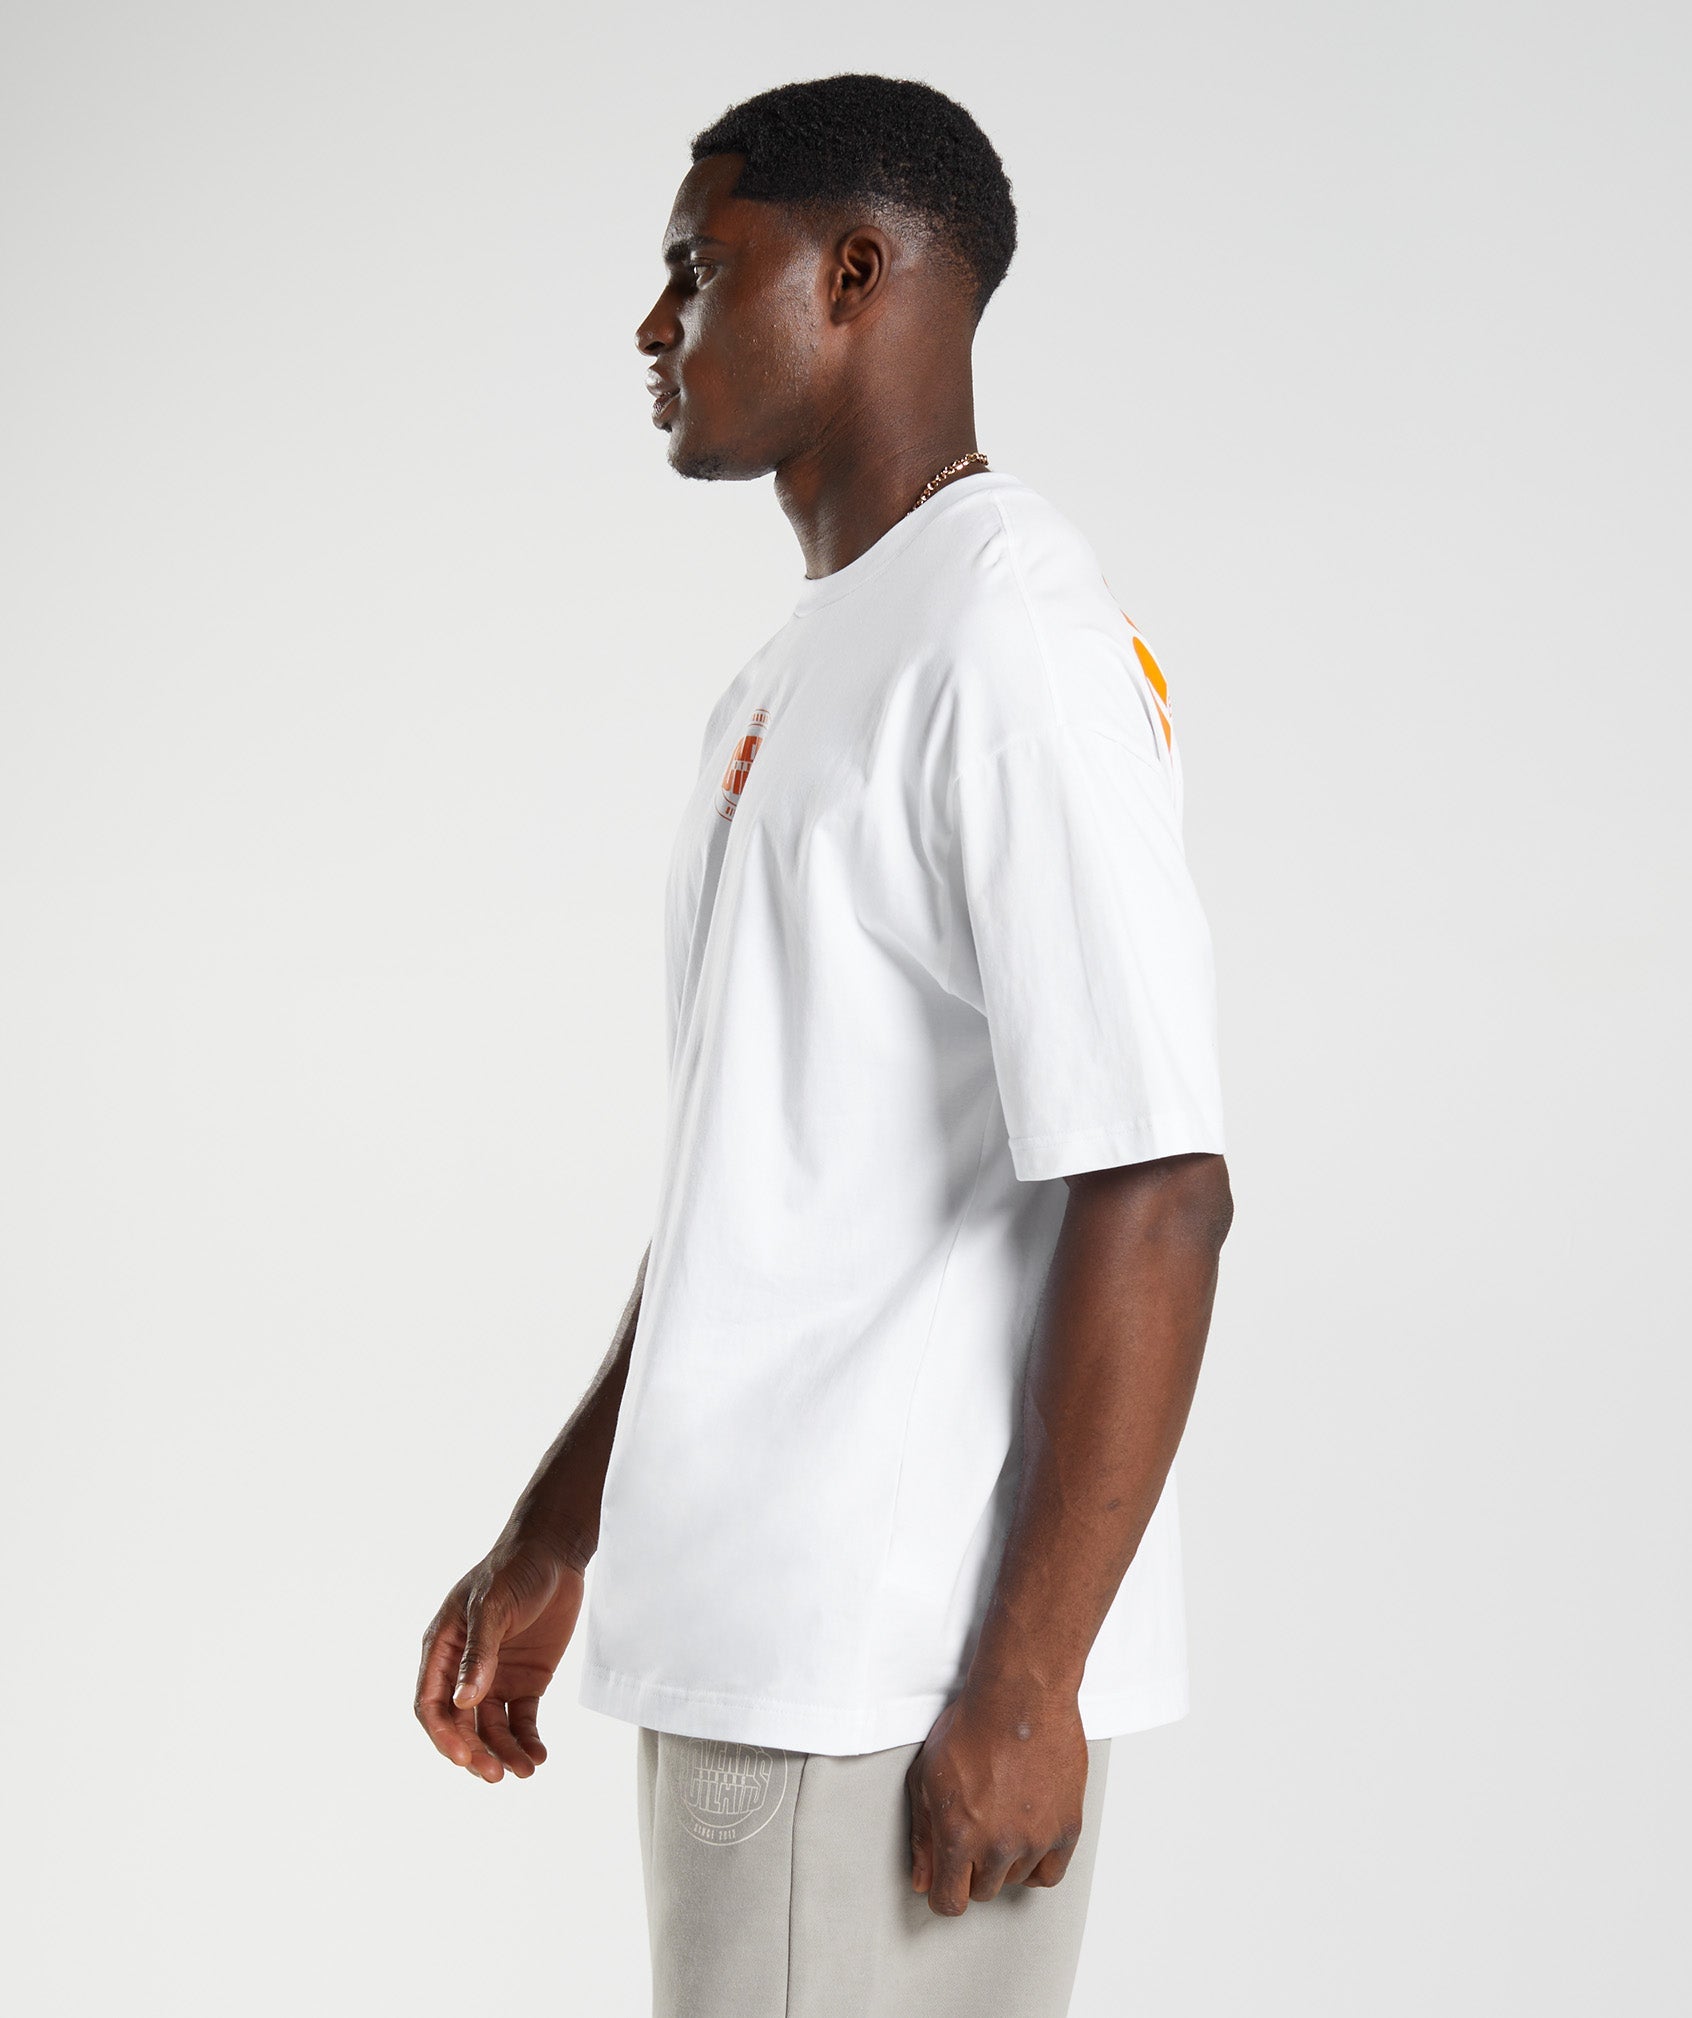 GS10 Year Oversized T-Shirt in White - view 3